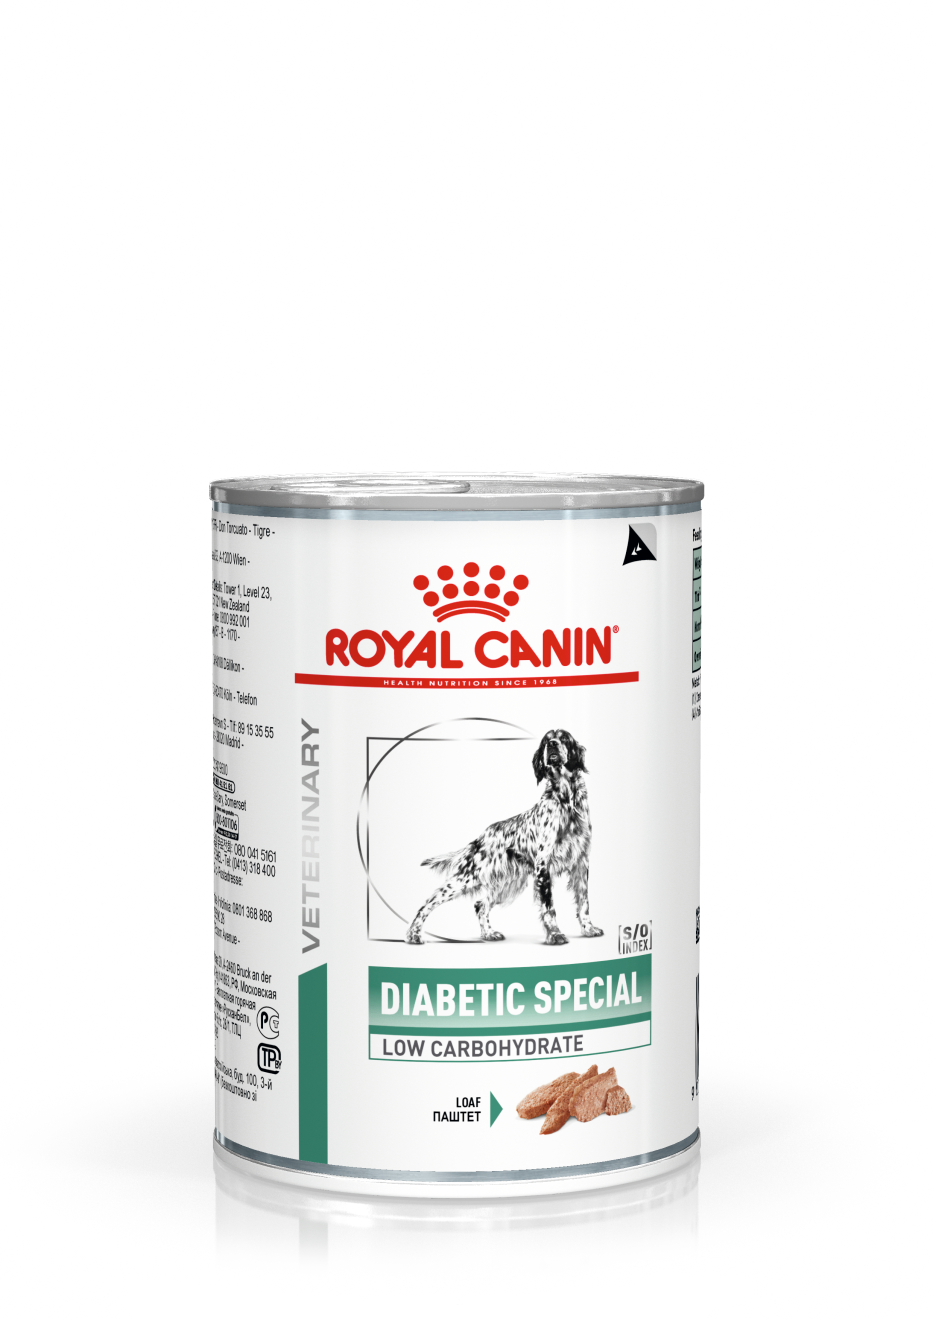 Royal Canin - Diabetic Special Dog - Low Carbohydrate